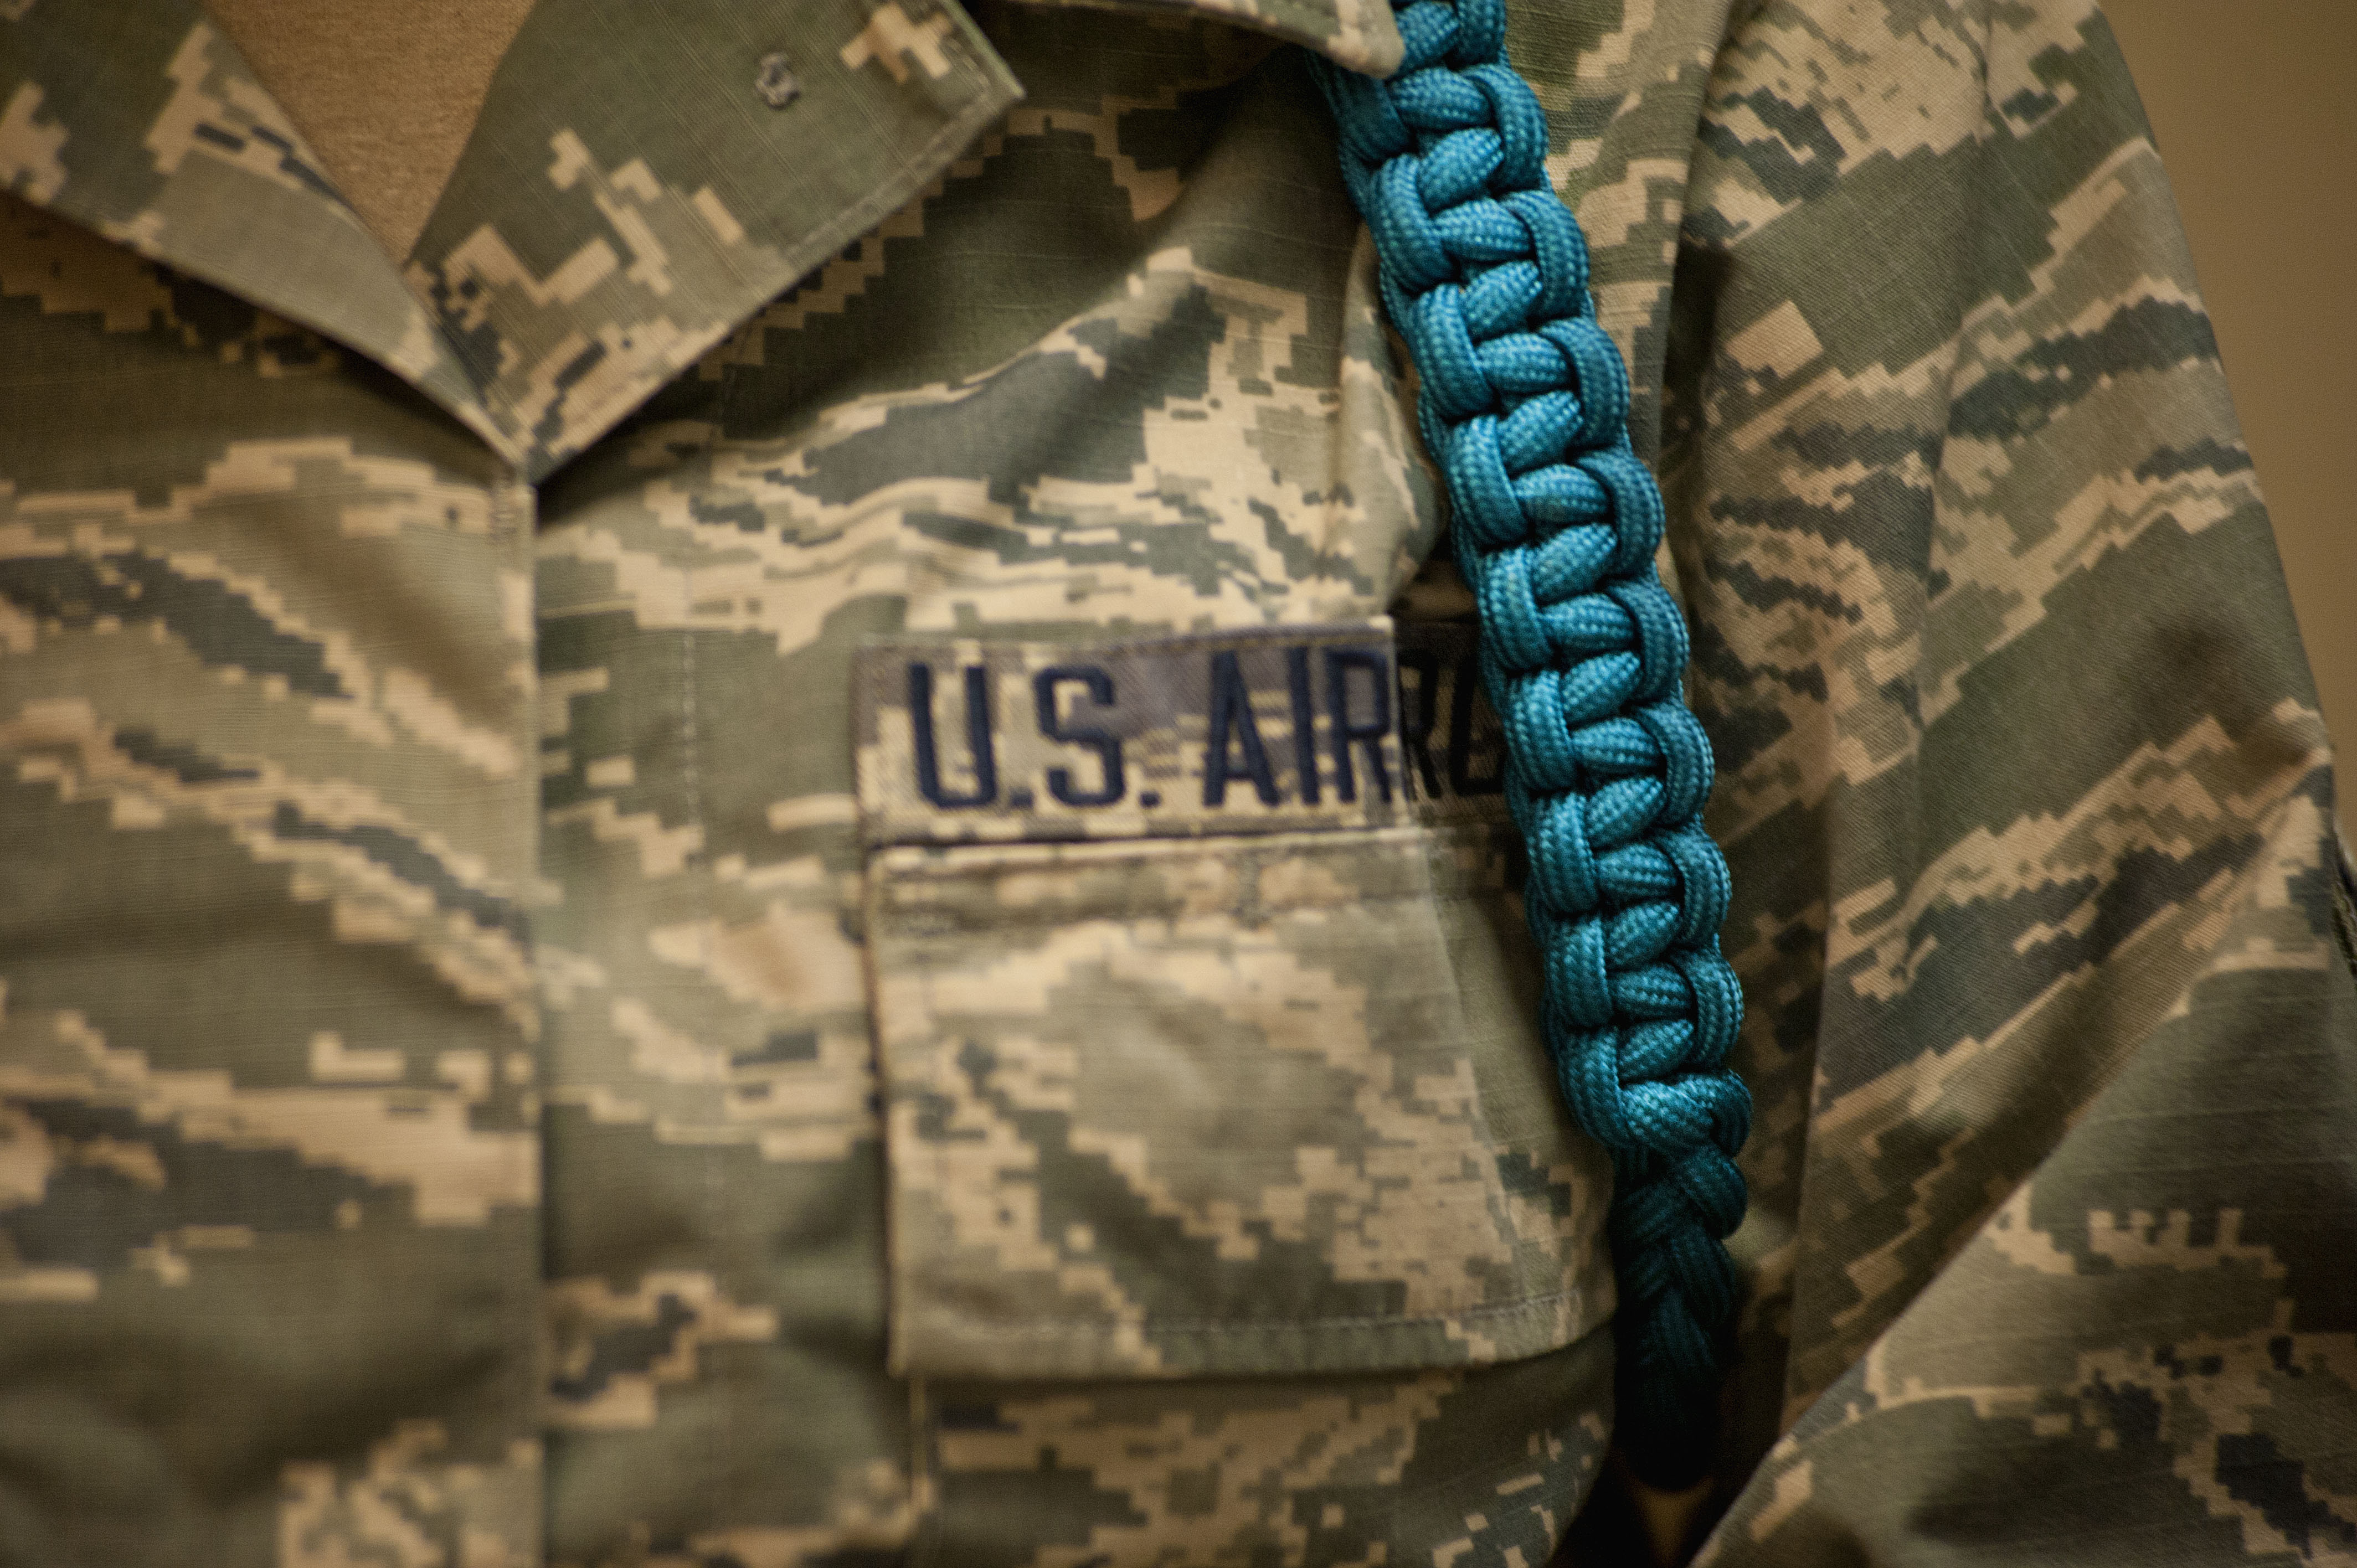 Airmen accountability: Teal rope program gets revamped > Sheppard